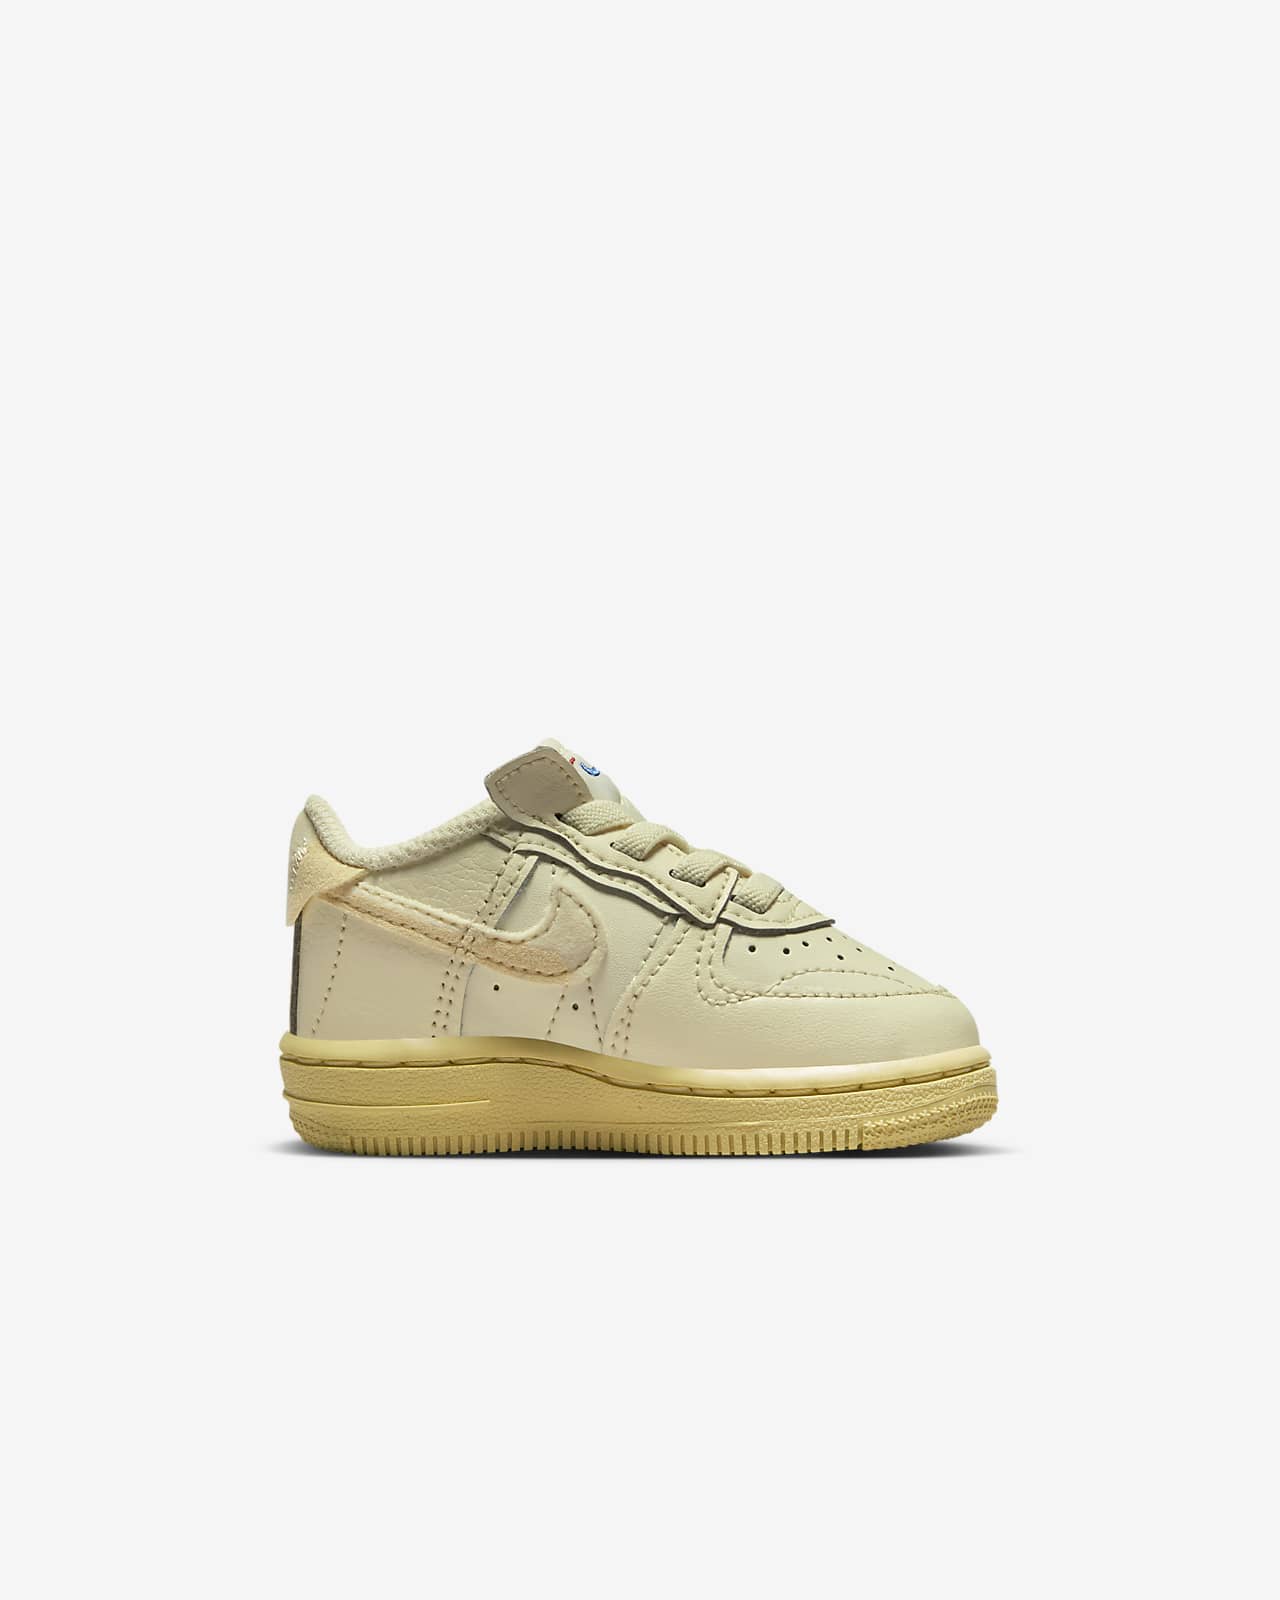 Nike Force 1 Baby/Toddler Shoes.